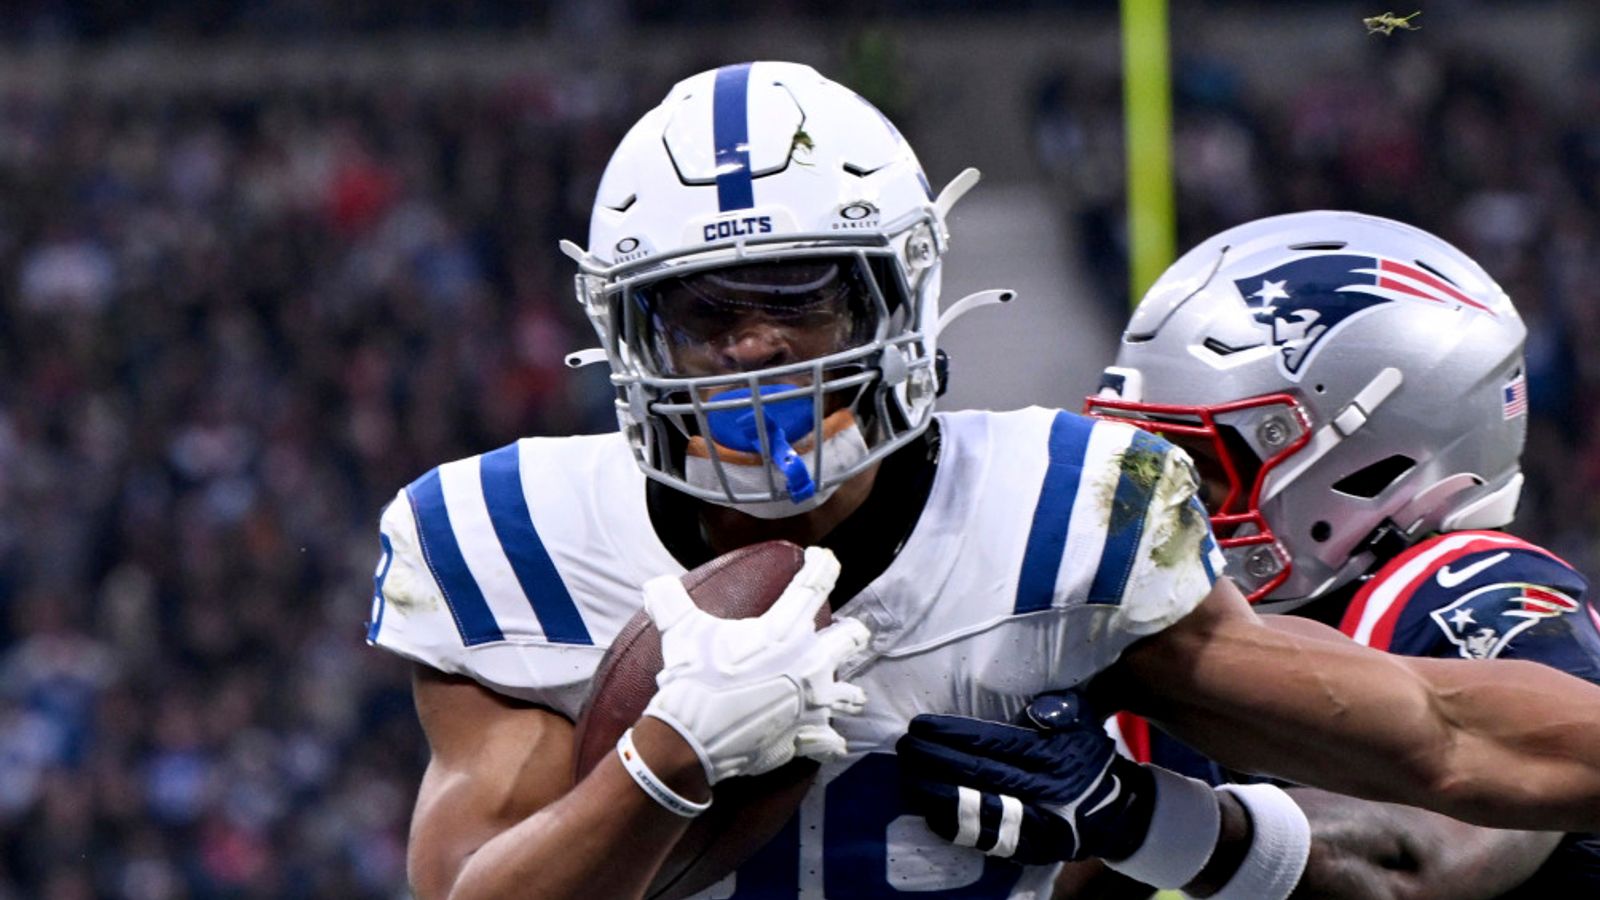 Indianapolis Colts 10-6 New England Patriots: Jonathan Taylor scores decisive TD as Mac Jones is benched in fourth quarter